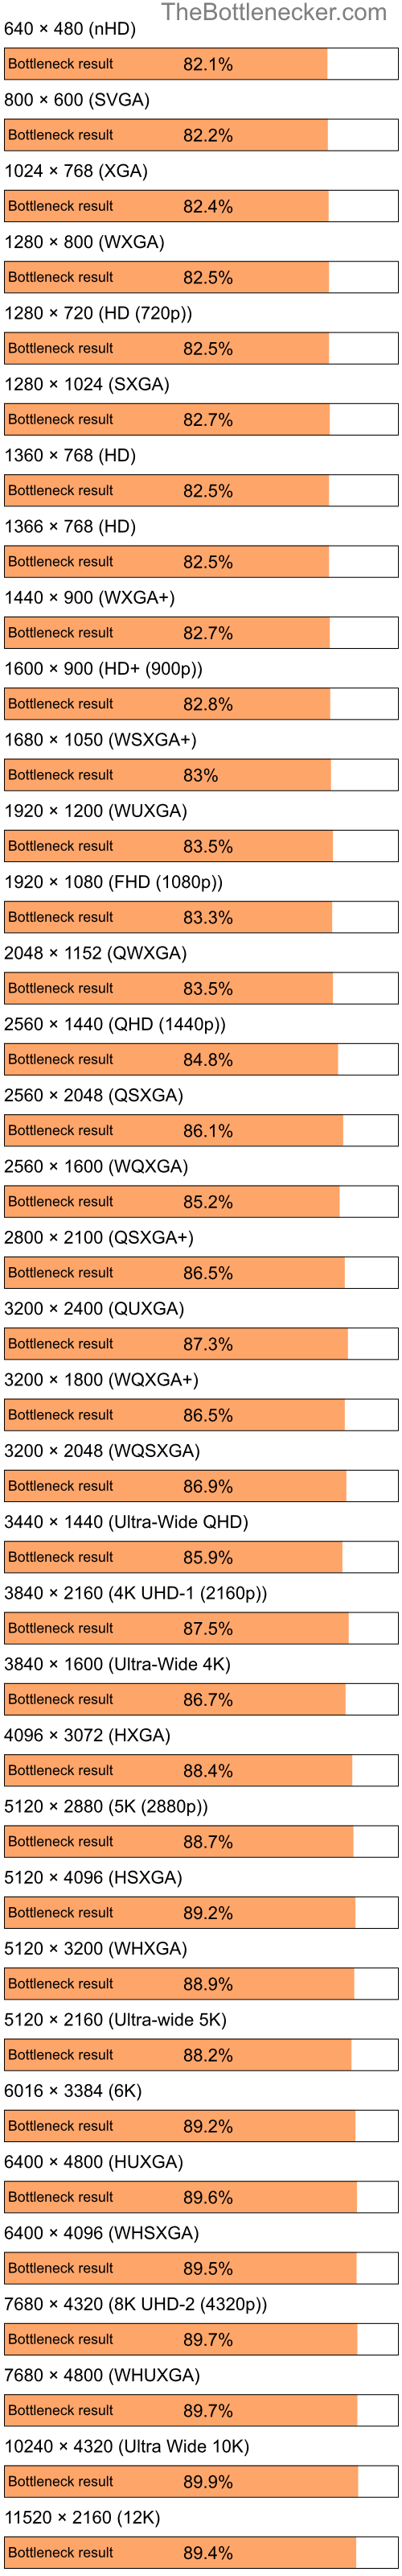 Bottleneck results by resolution for Intel Pentium 4 and NVIDIA GeForce 7050 PV in Graphic Card Intense Tasks